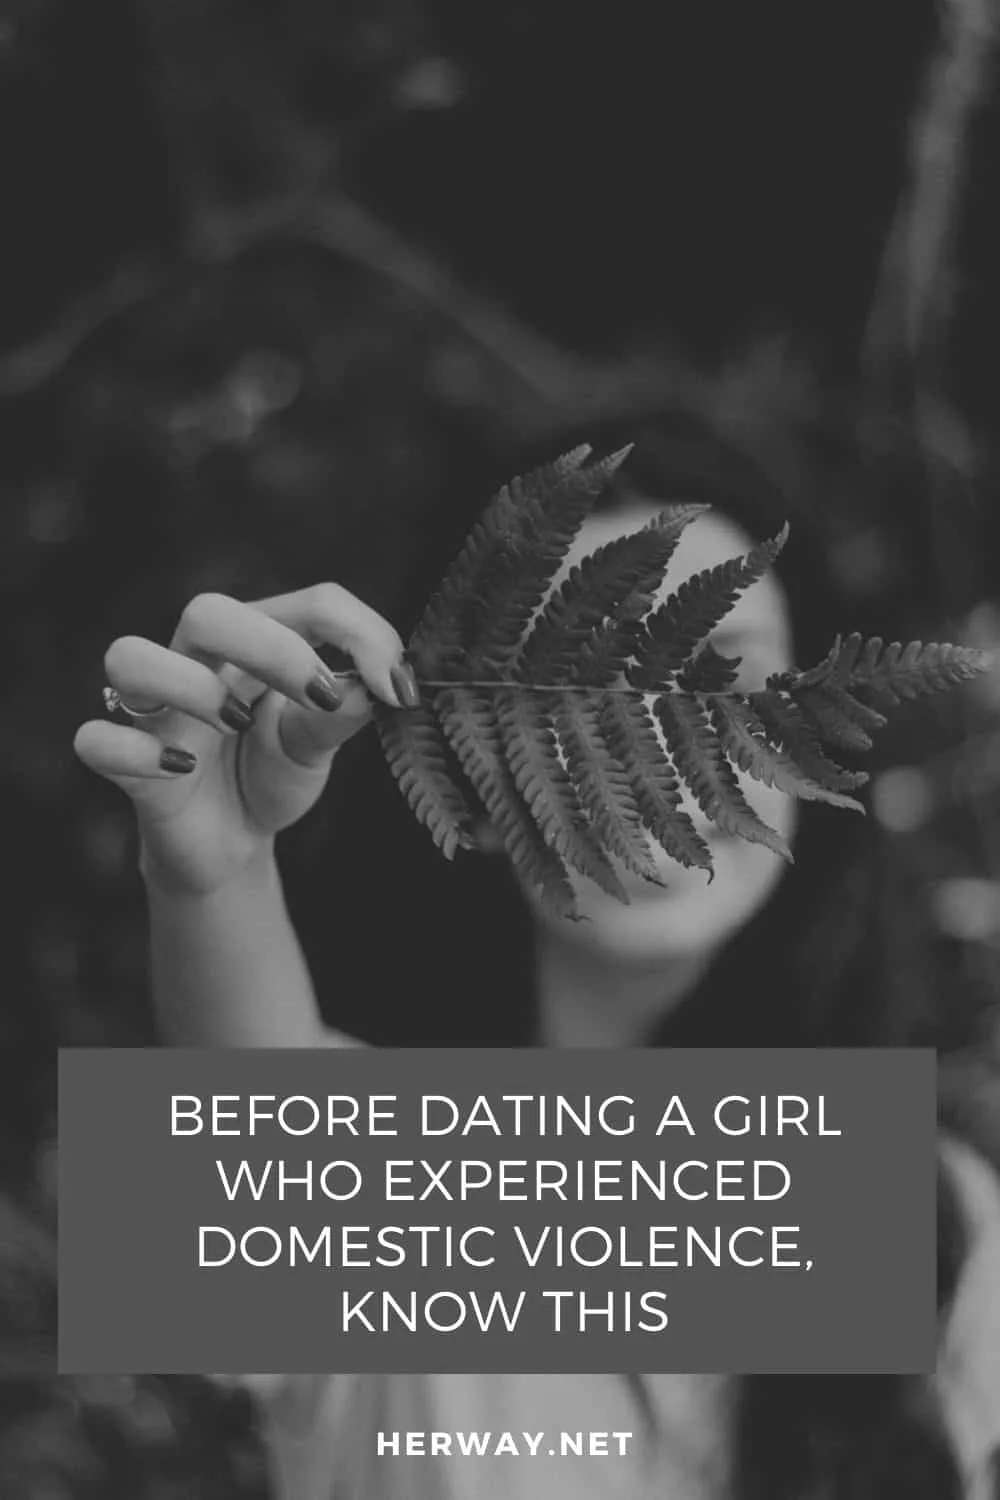 BEFORE DATING A GIRL WHO EXPERIENCED DOMESTIC VIOLENCE, KNOW THIS